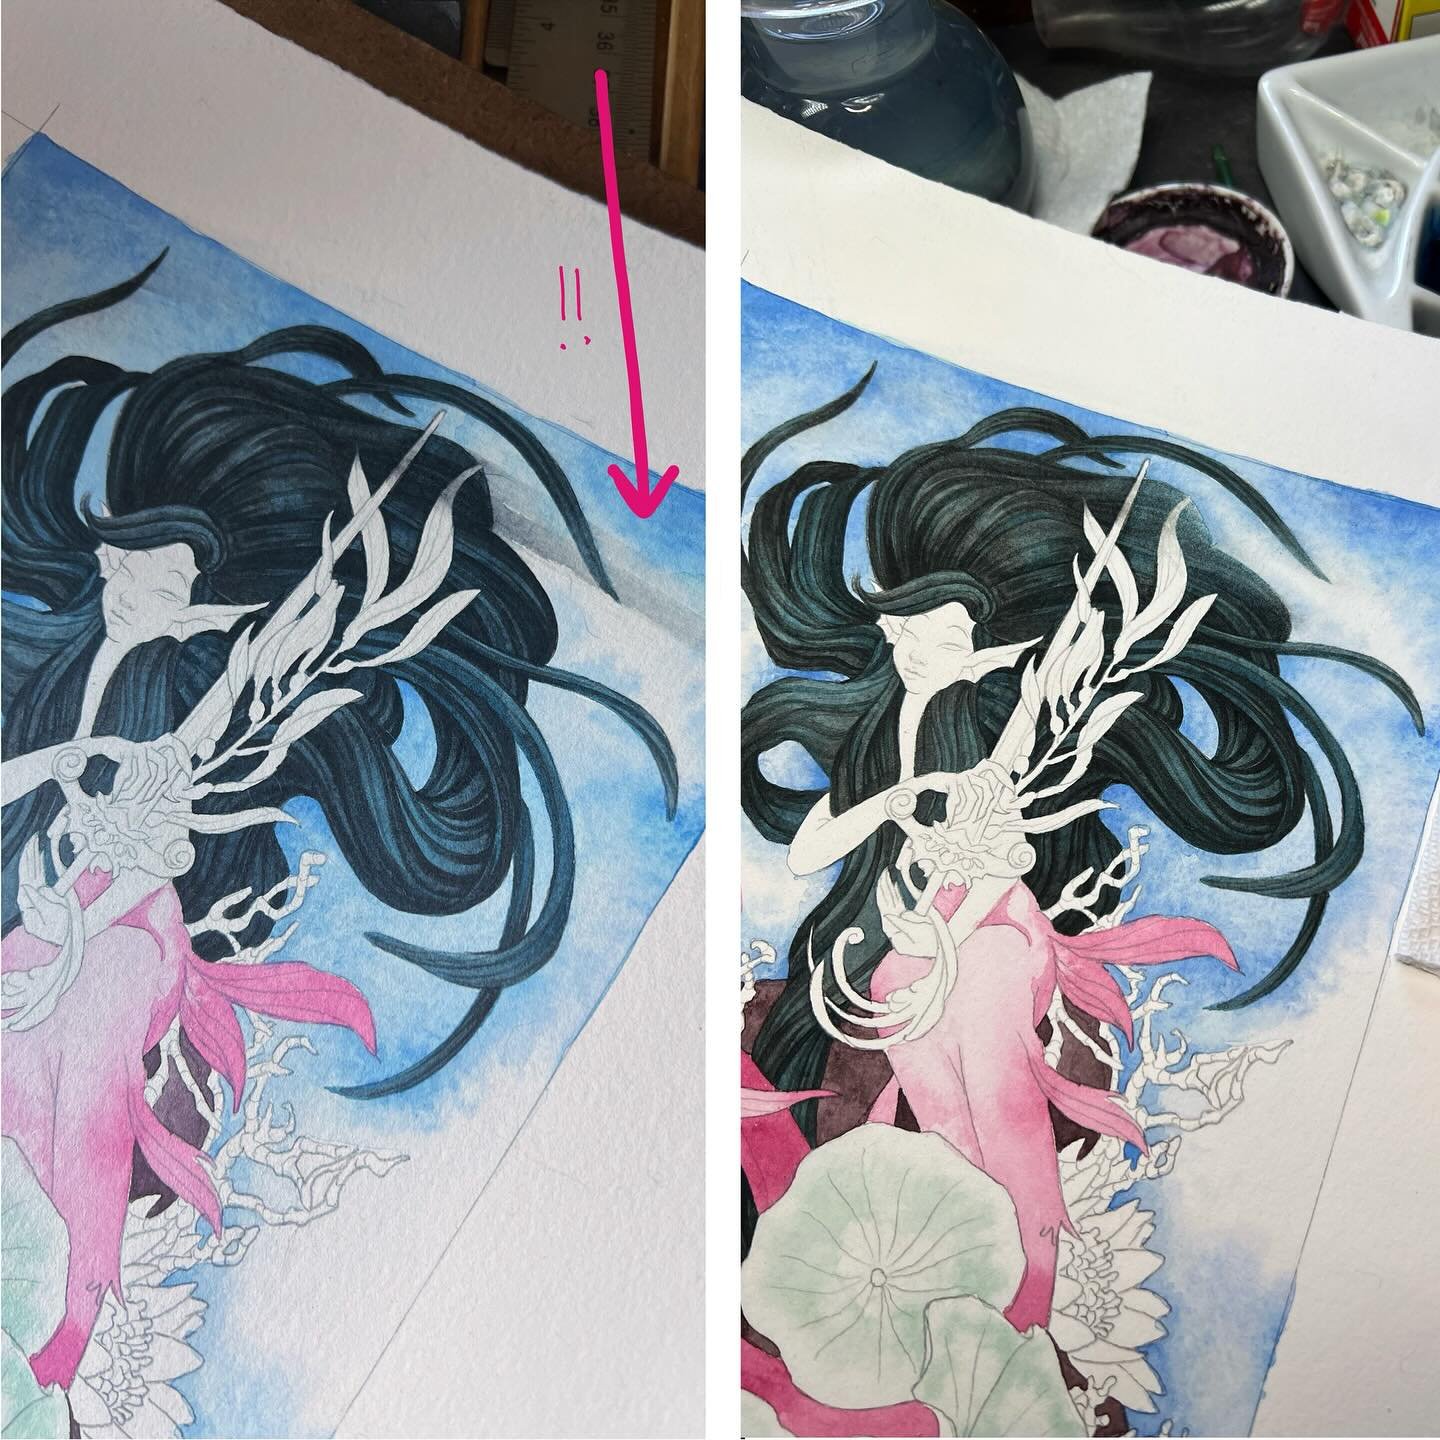 🩷🌸 My time as an art restorer comes in handy when I mess up a painting 😂 There&rsquo;s still a little touch-up left to do, but I wanna get the rest of the painting up to snuff first 🩷🌸 

🩷🌸 Wish me luck that I don&rsquo;t mess it up again 🫠

